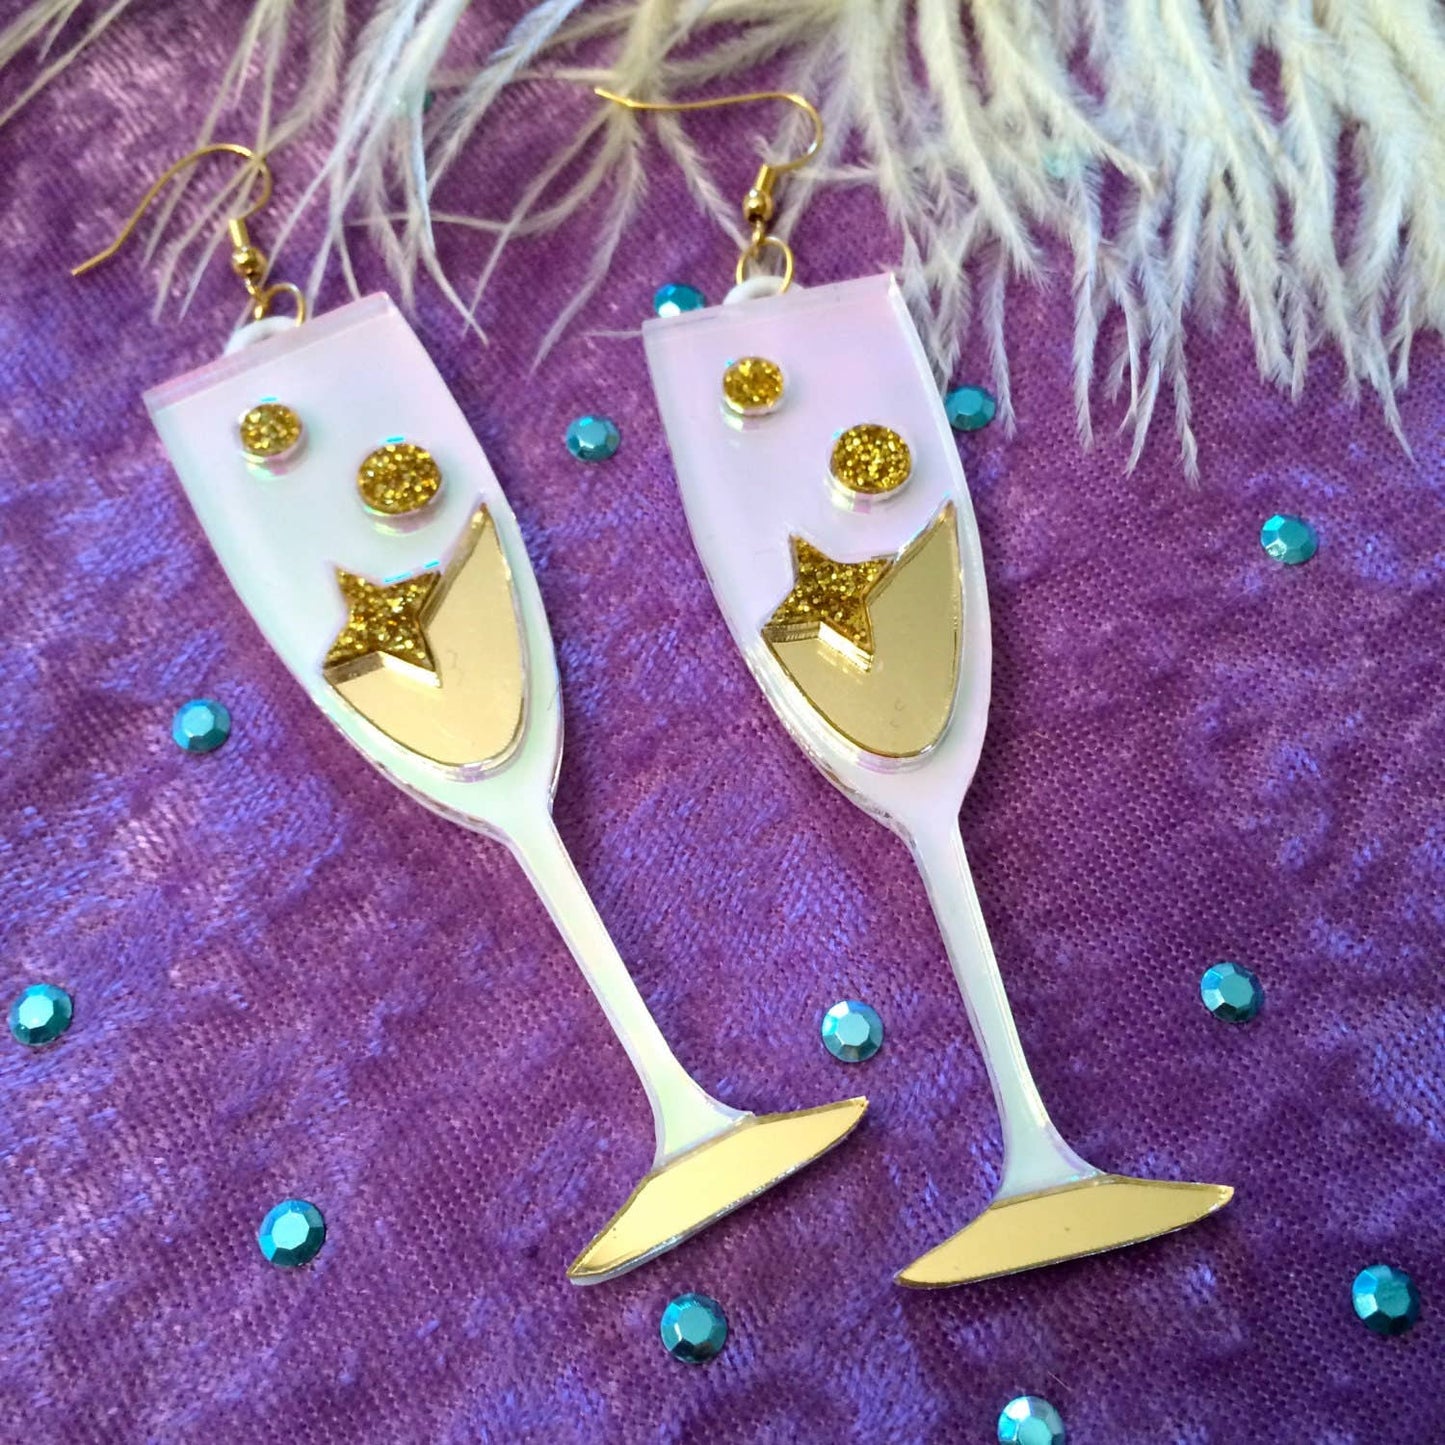 I'm Your Present - Champagne Flute Celebration Earrings, Laser Cut Acrylic, Plastic Jewelry